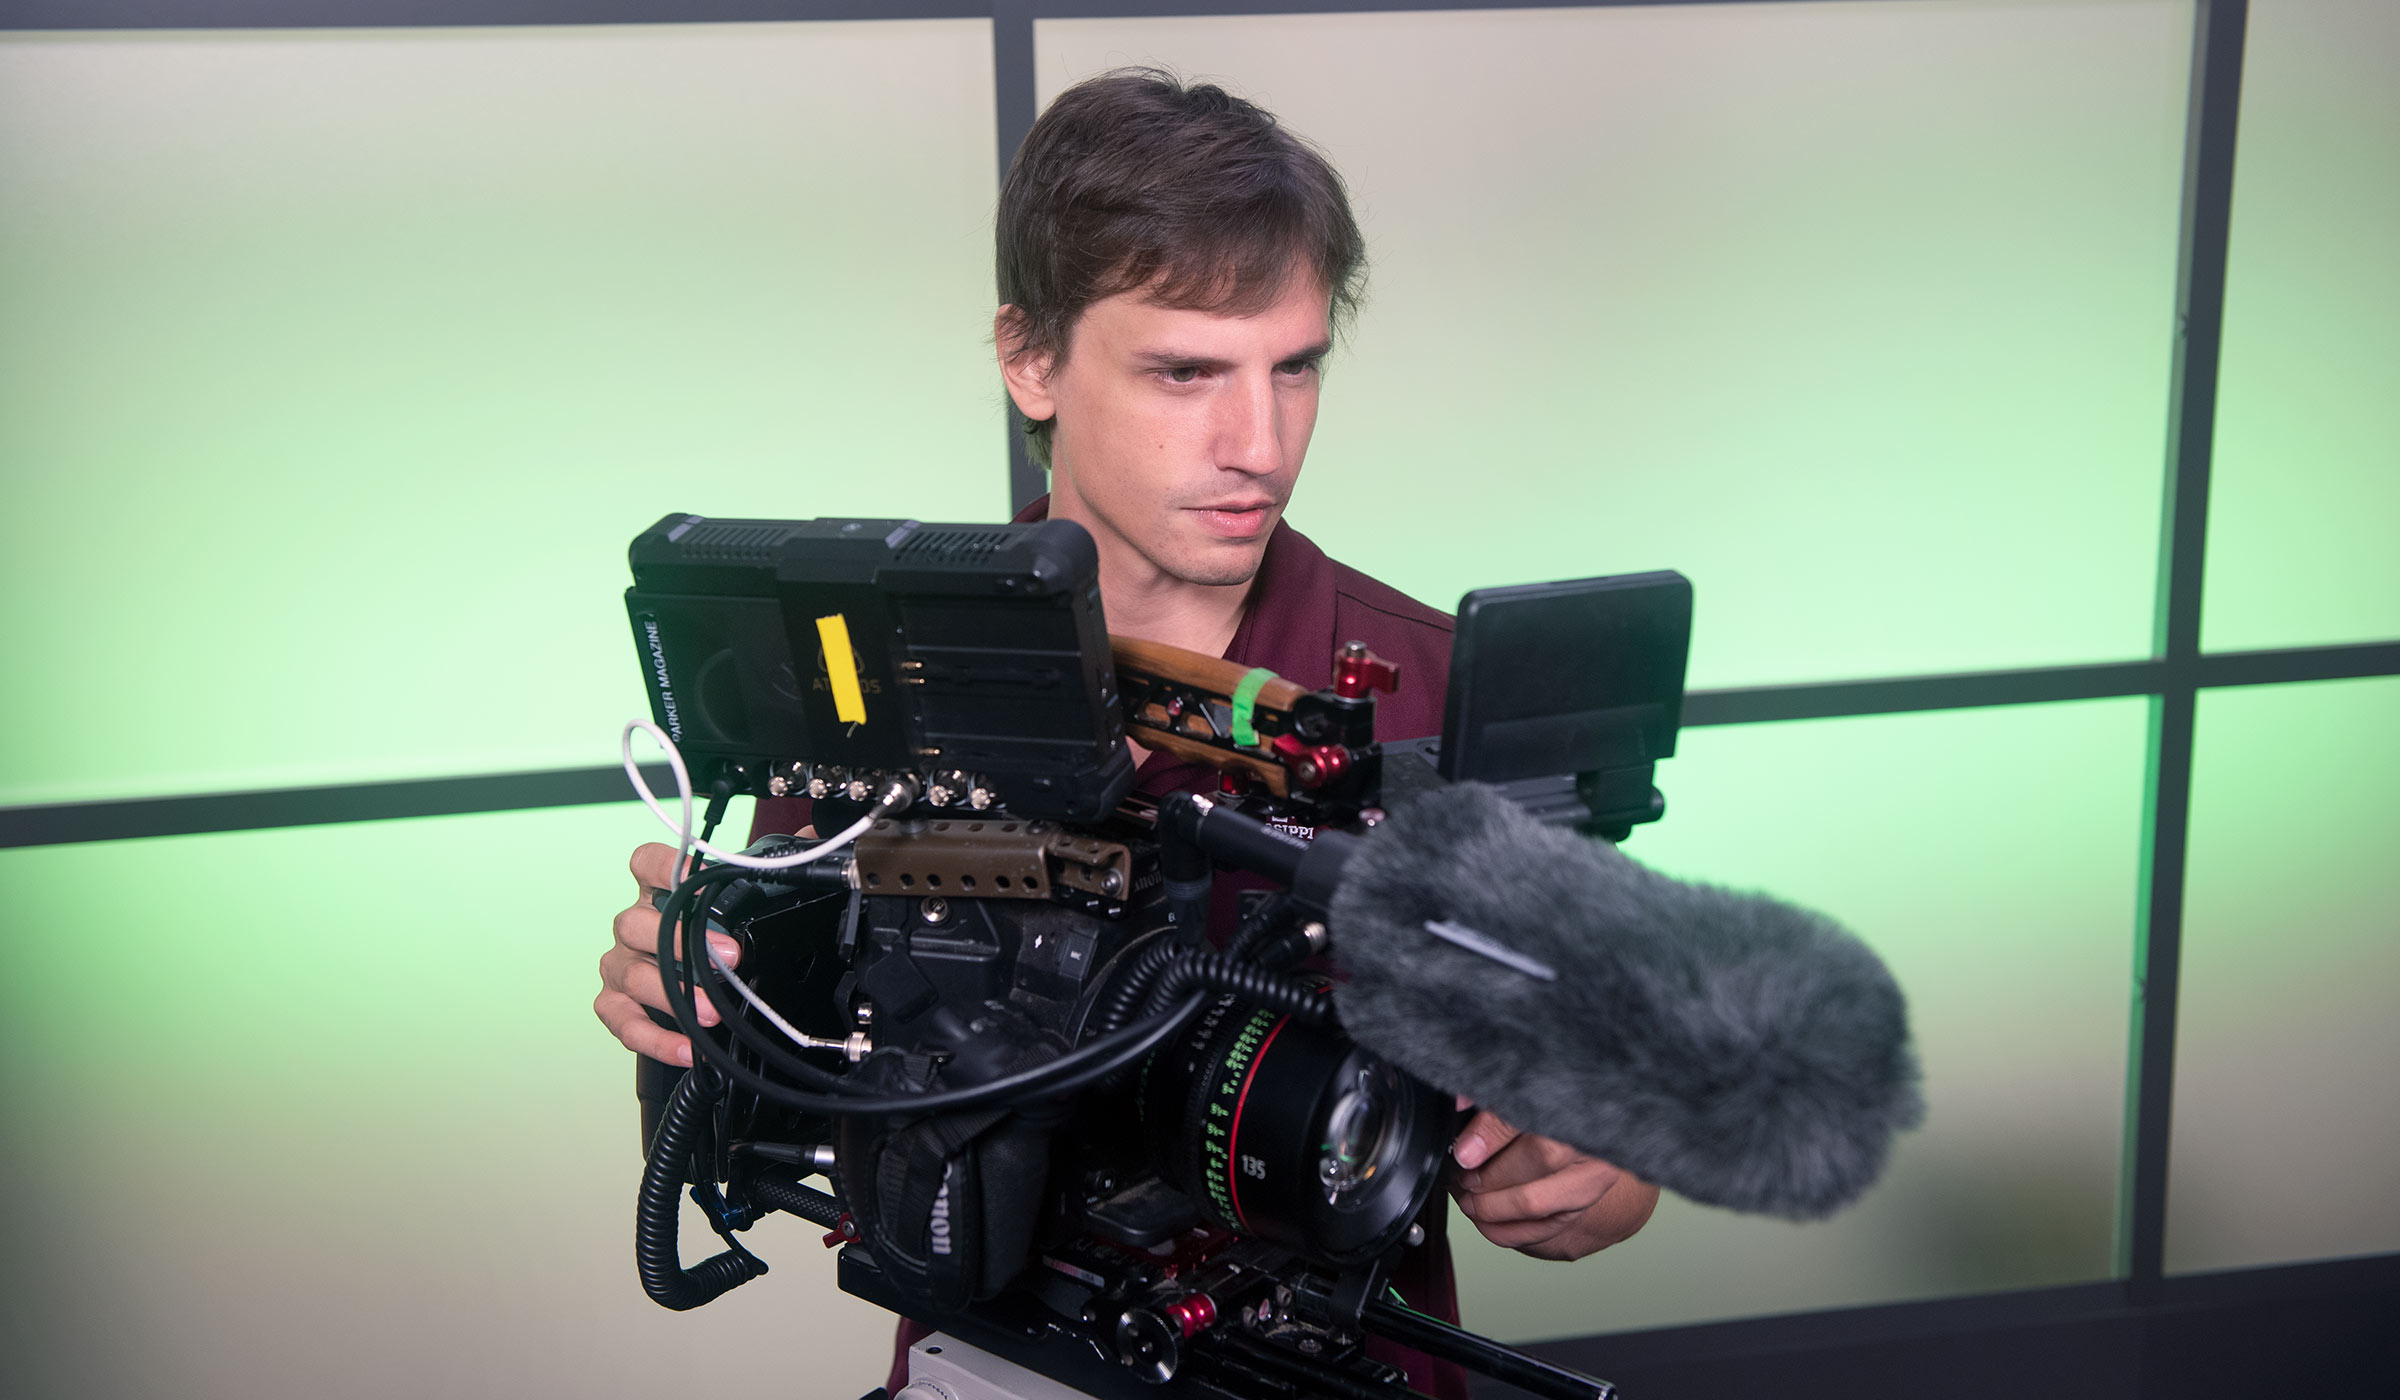 James Parker, pictured working with a camera at the MSU Television Center